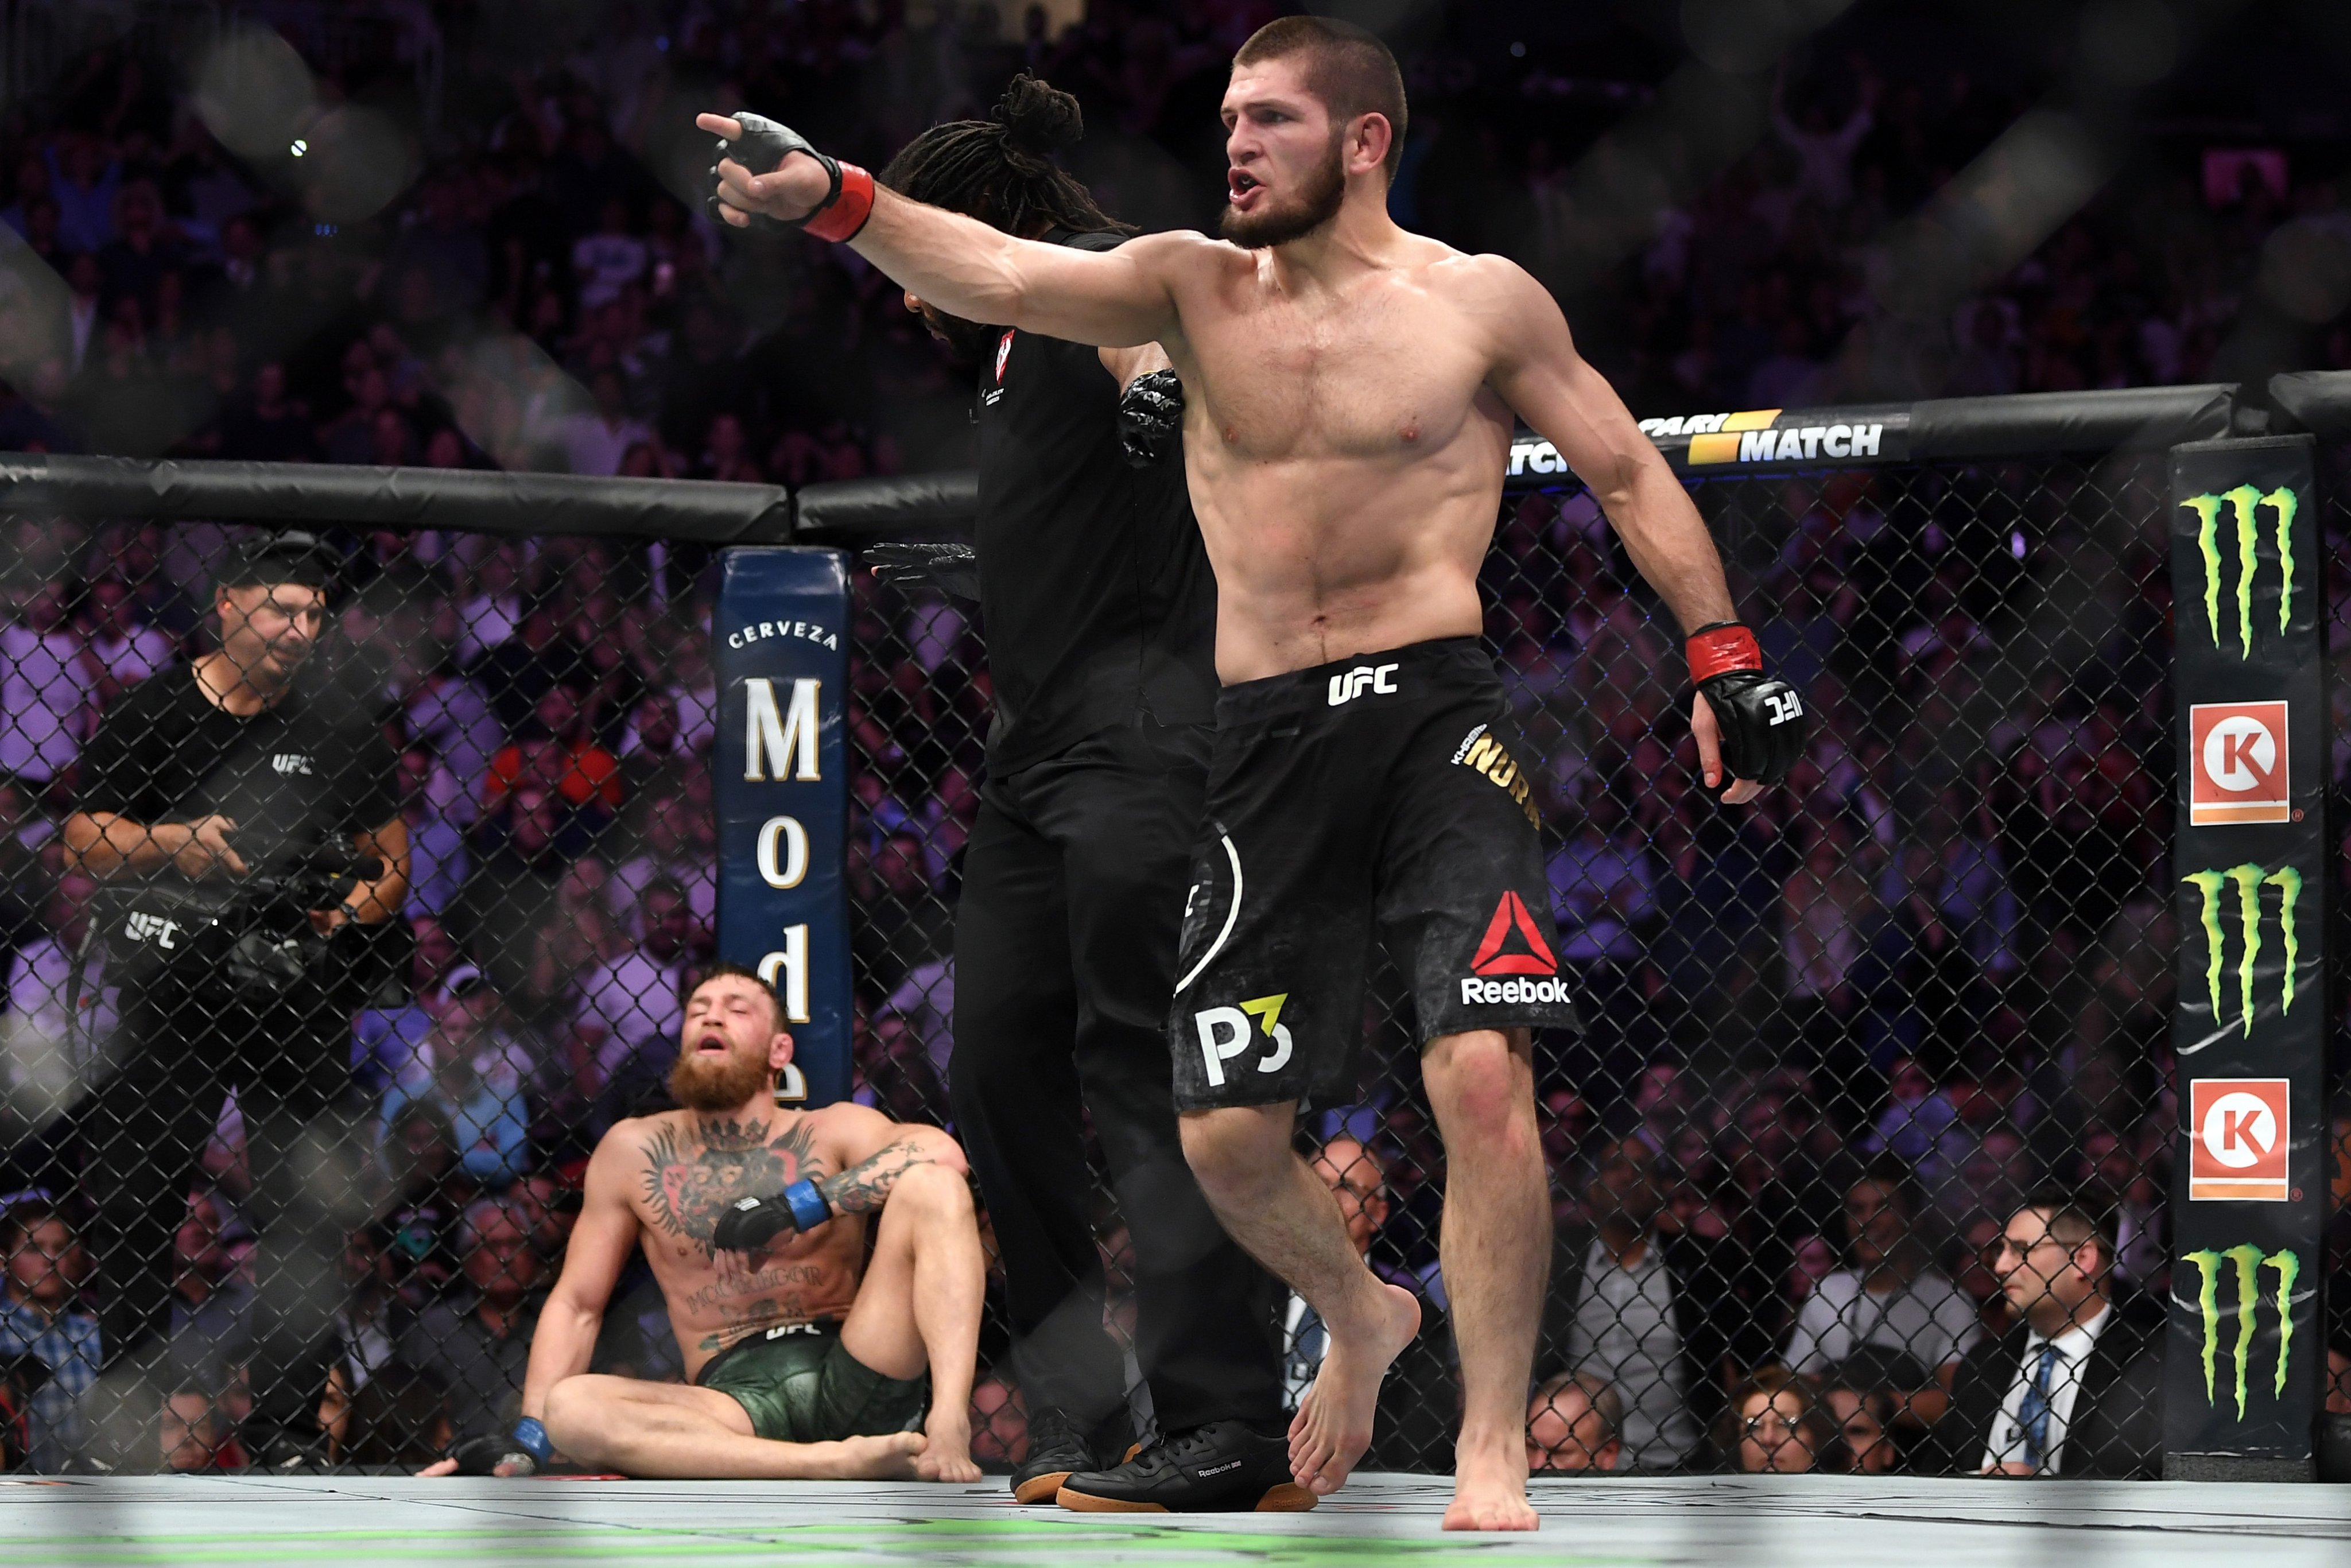 Khabib Nurmagomedov exchanges words with Conor McGregor's team, following victory at UFC 229 (UFC/Getty Images)